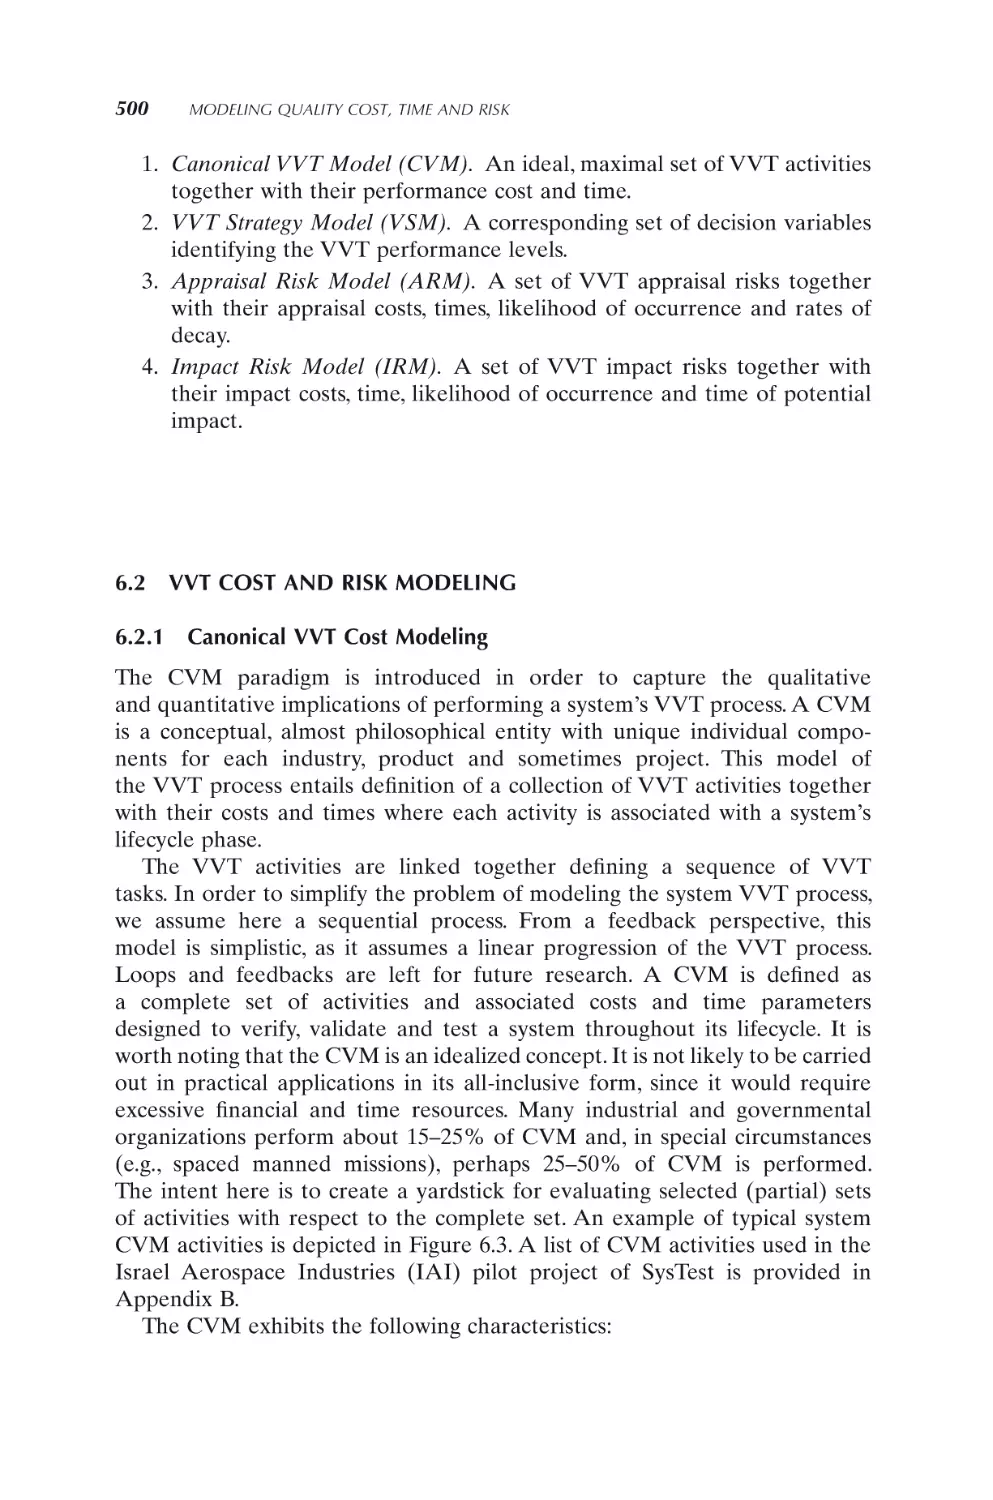 6.2 VVT COST AND RISK MODELING
6.2.1 Canonical VVT Cost Modeling